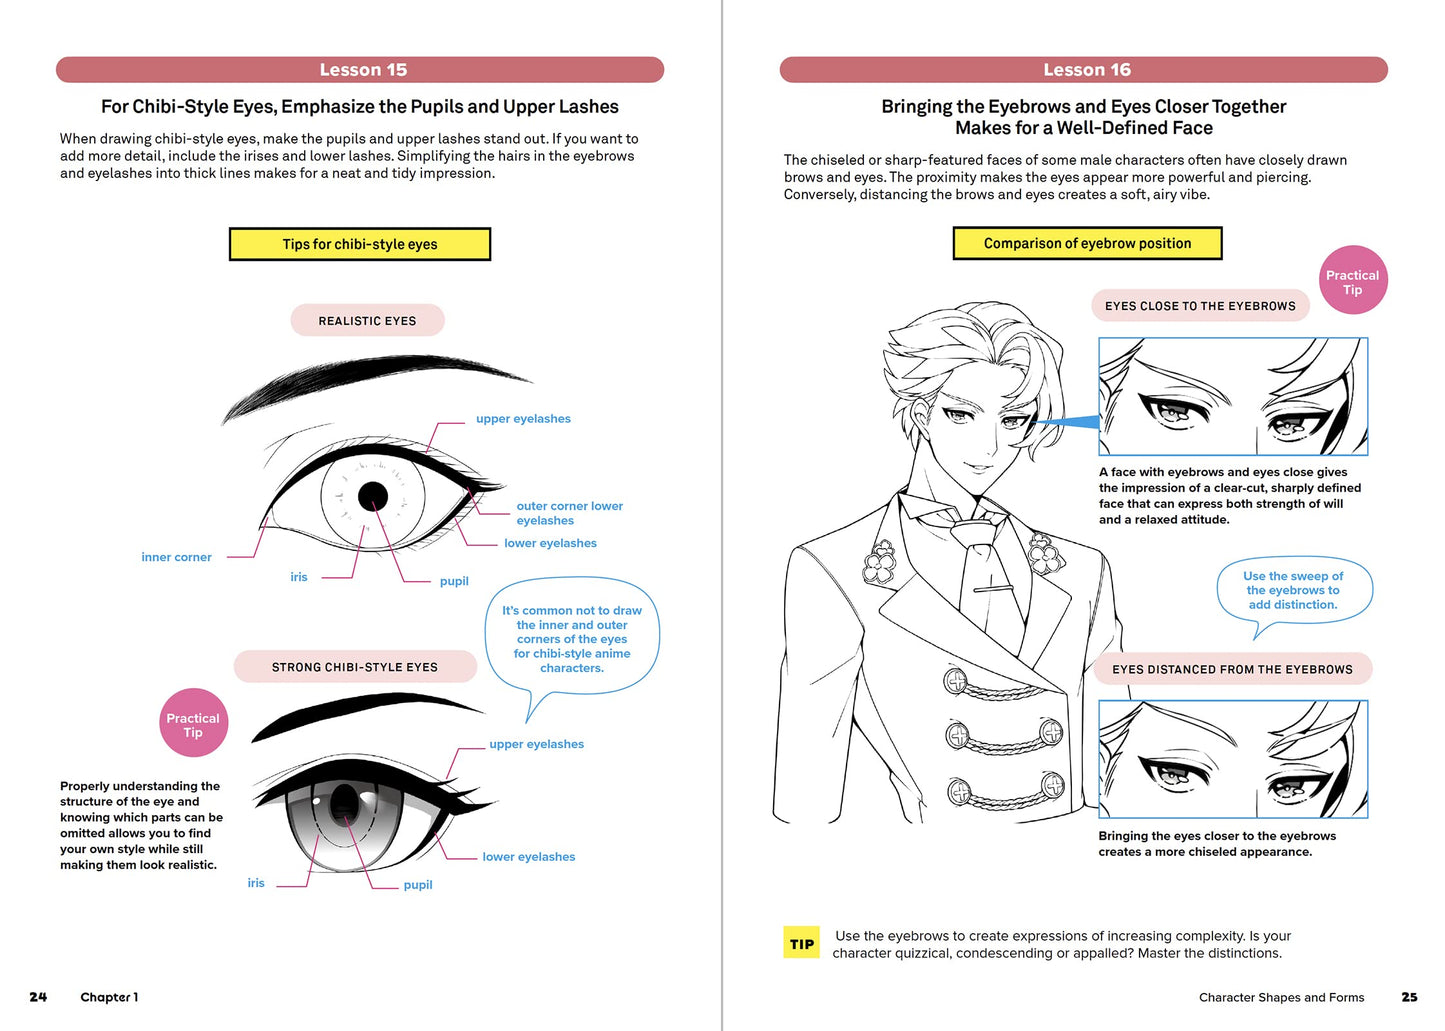 Learn to Draw Exciting Anime & Manga Characters: Lessons from 100 Professional Japanese Illustrators (with Over 600 Illustrations)